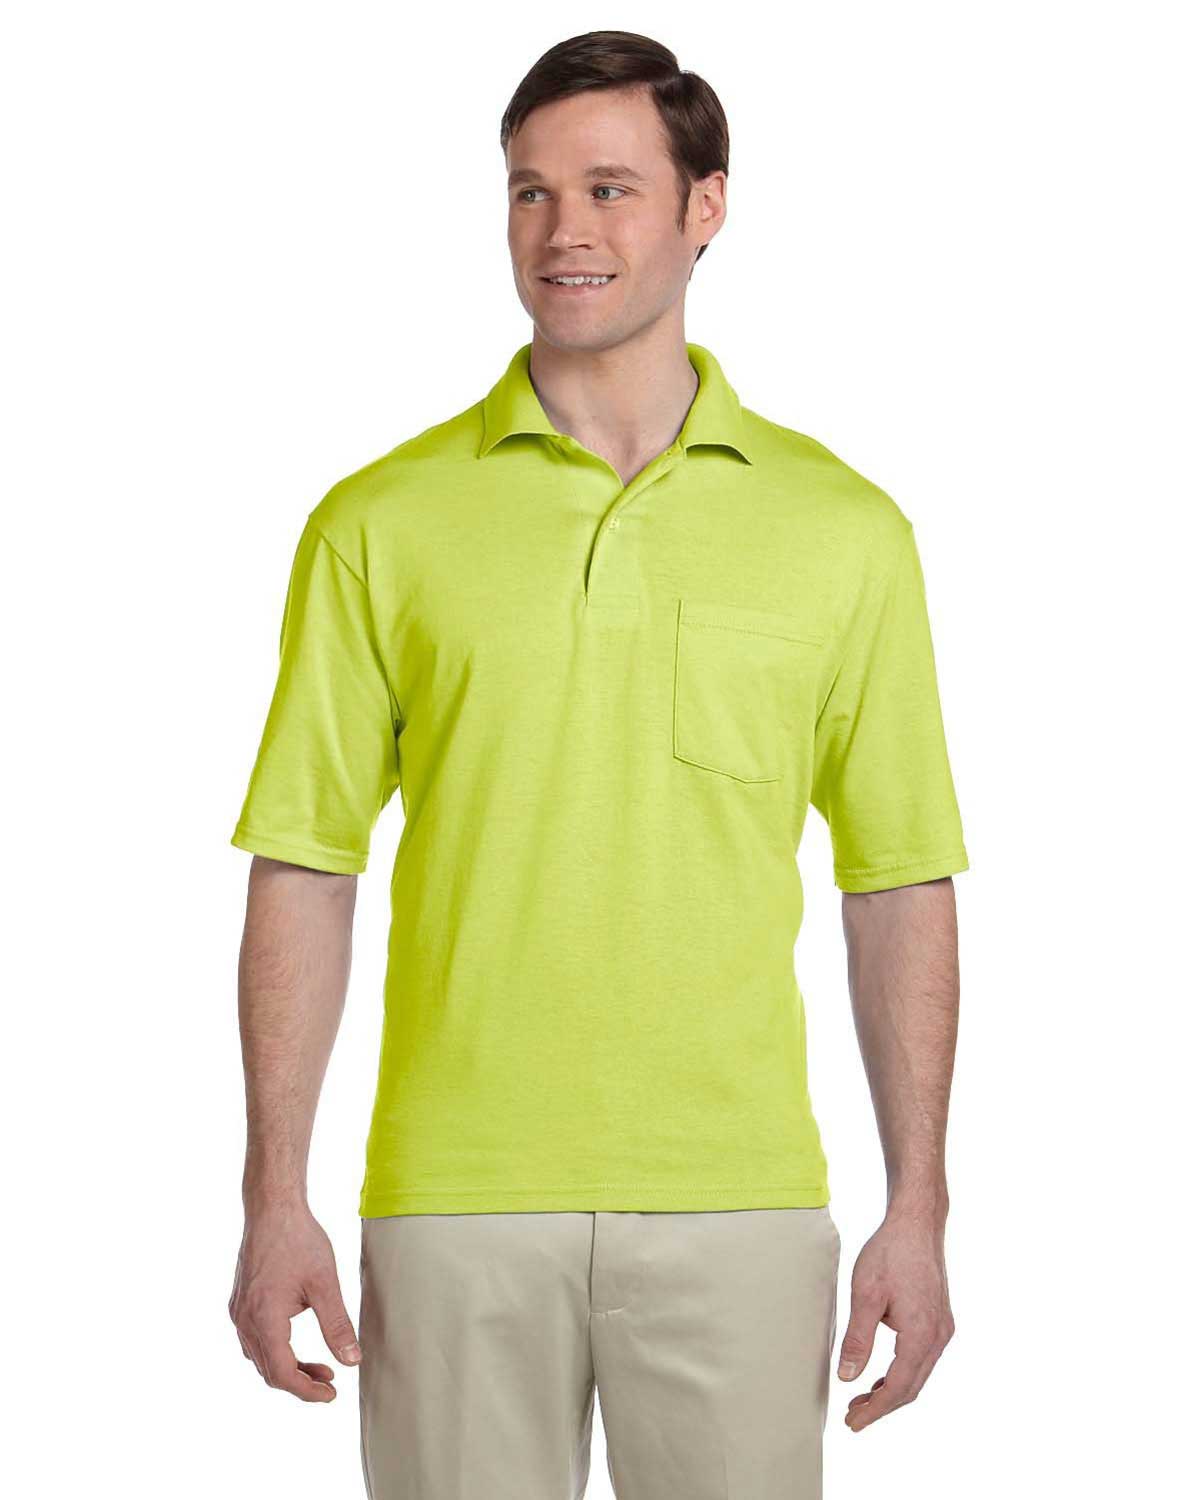 Jerzees 436P Men 50/50 Jersey Pocket Polo With Spotshield at Apparelstation